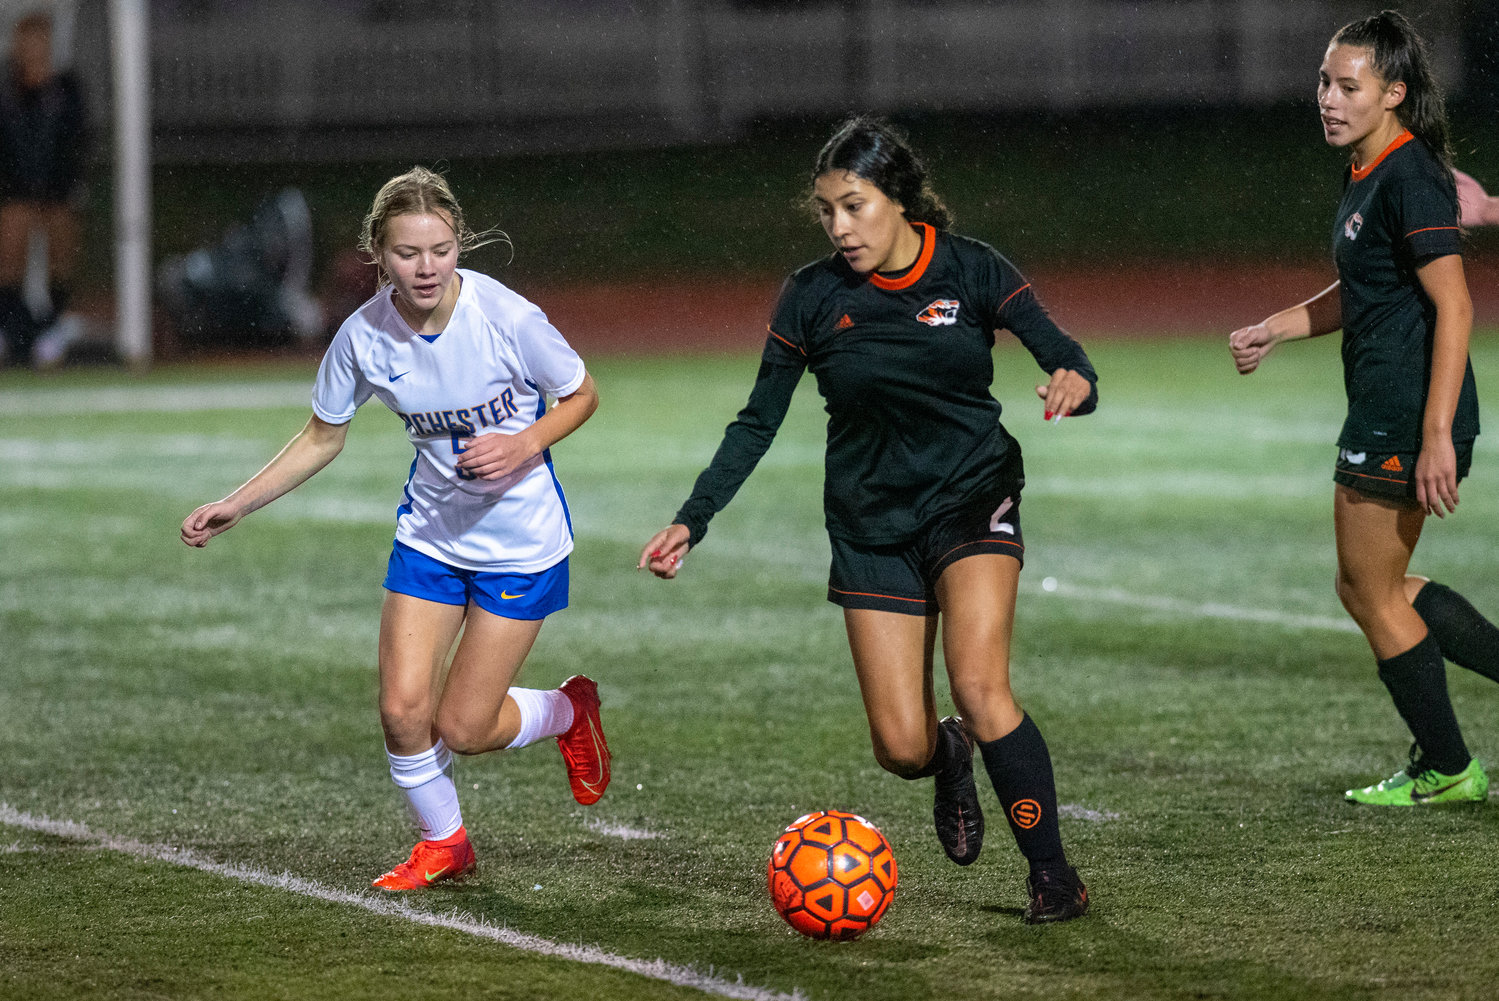 Centralia's Anahi Corona (2) dribbles downfield against Rochester on Oct. 26, 2021.